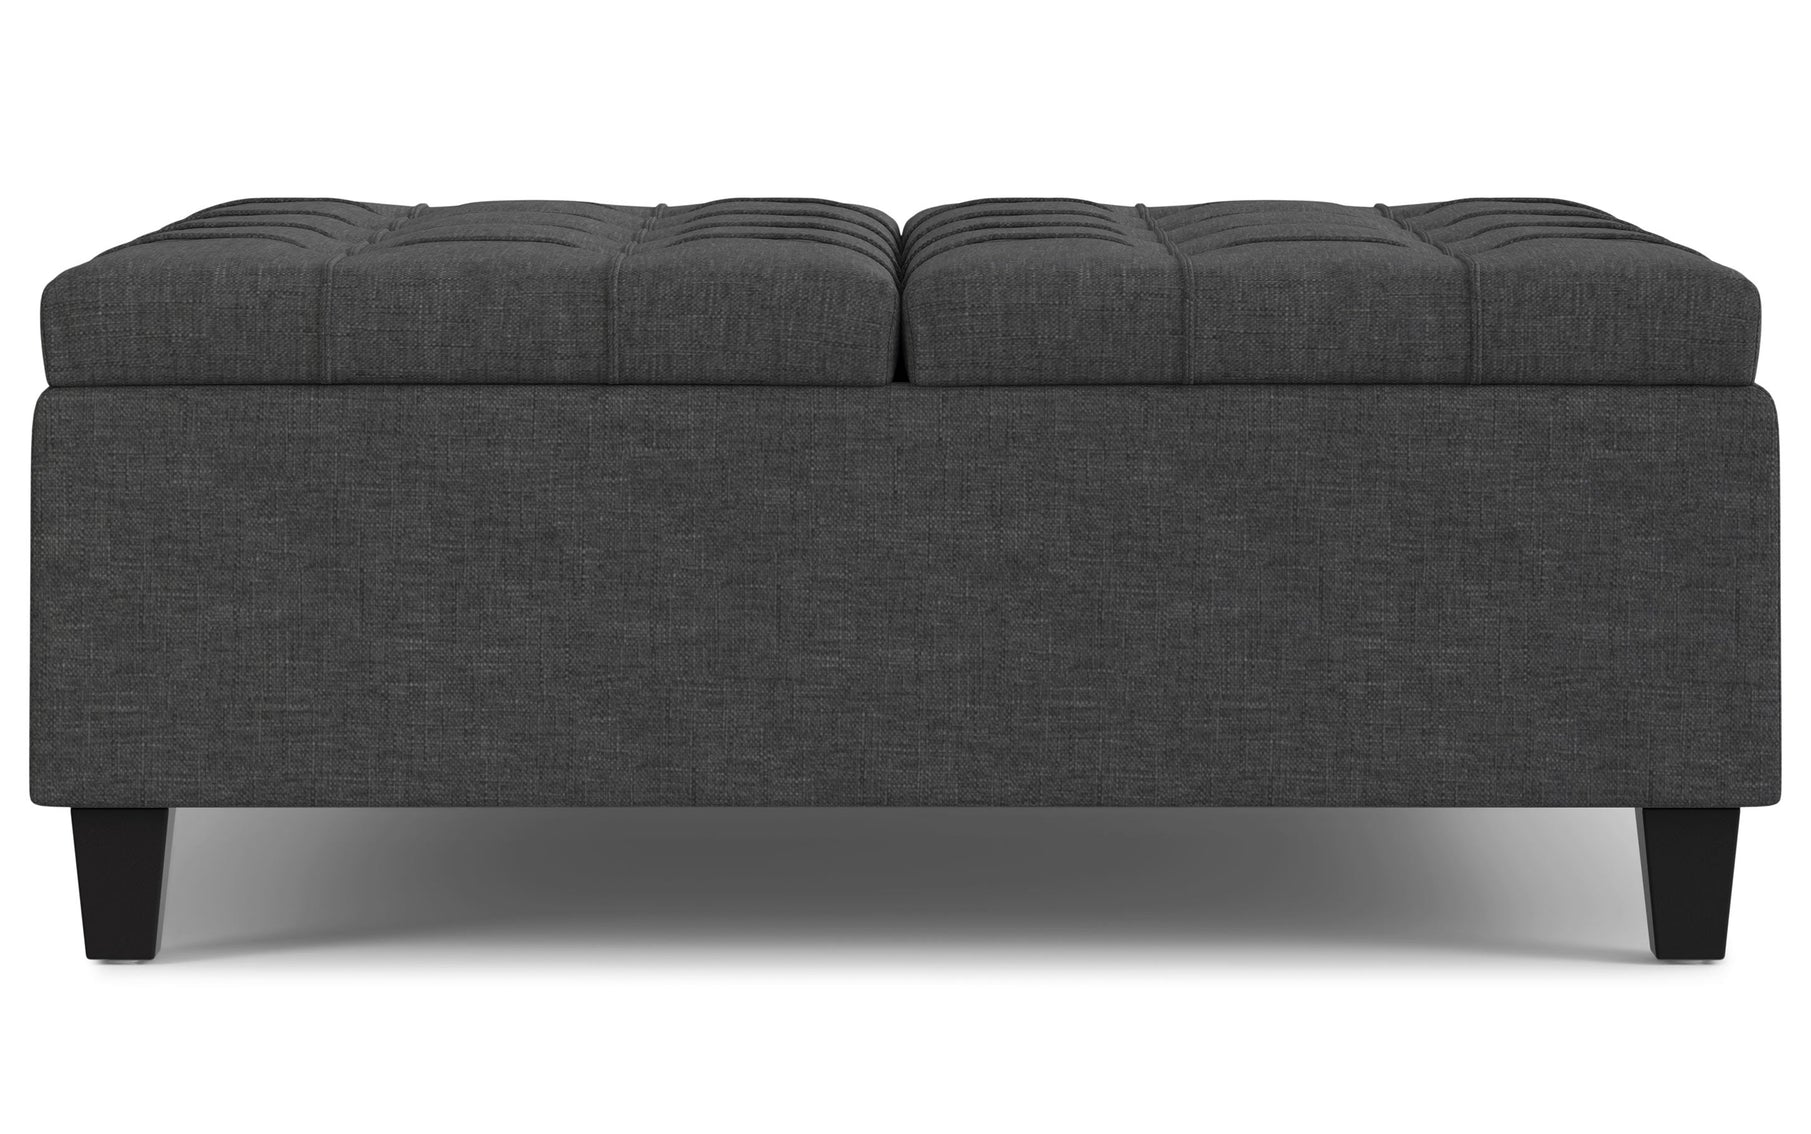 Slate Grey Linen Style Fabric | Harrison Large Square Coffee Table Storage Ottoman in Linen